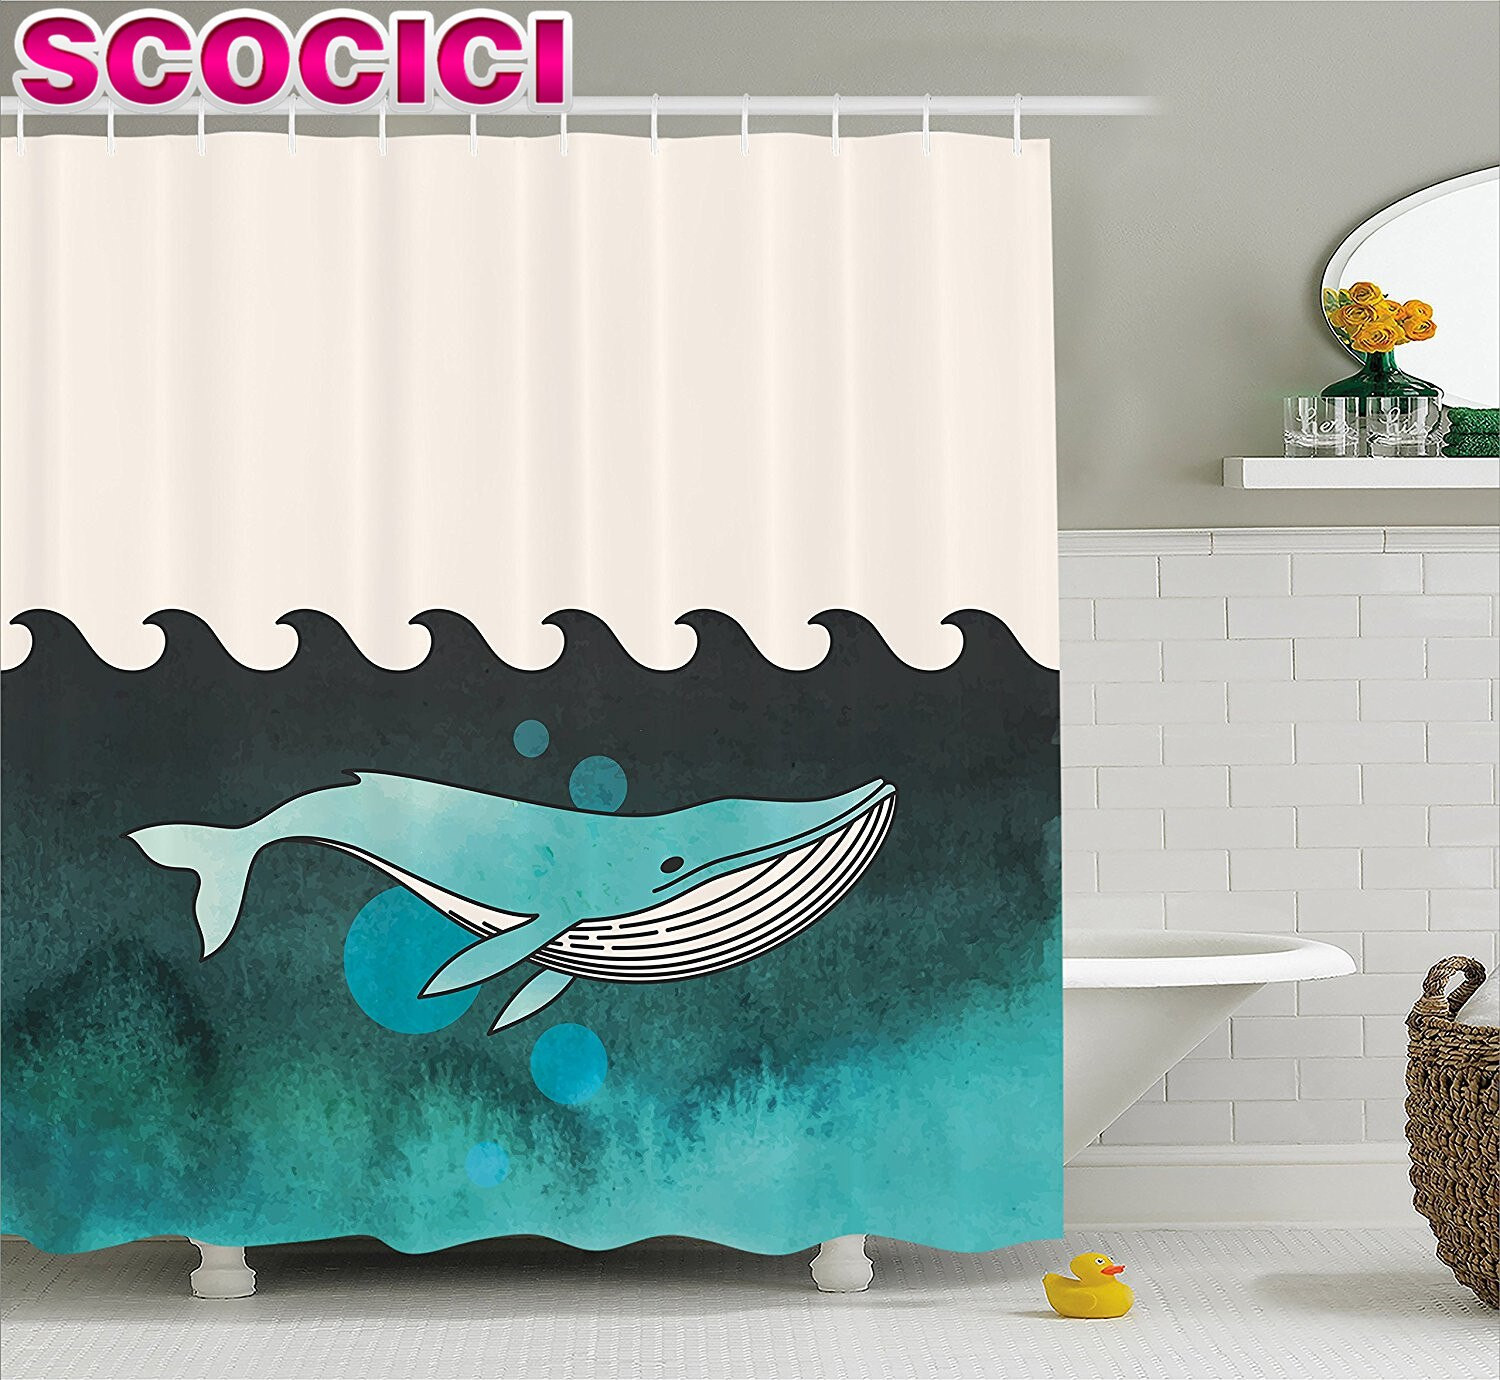 Whale Bathroom Decor
 Whale Decor Shower Curtain Huge Whale Swimming Under the